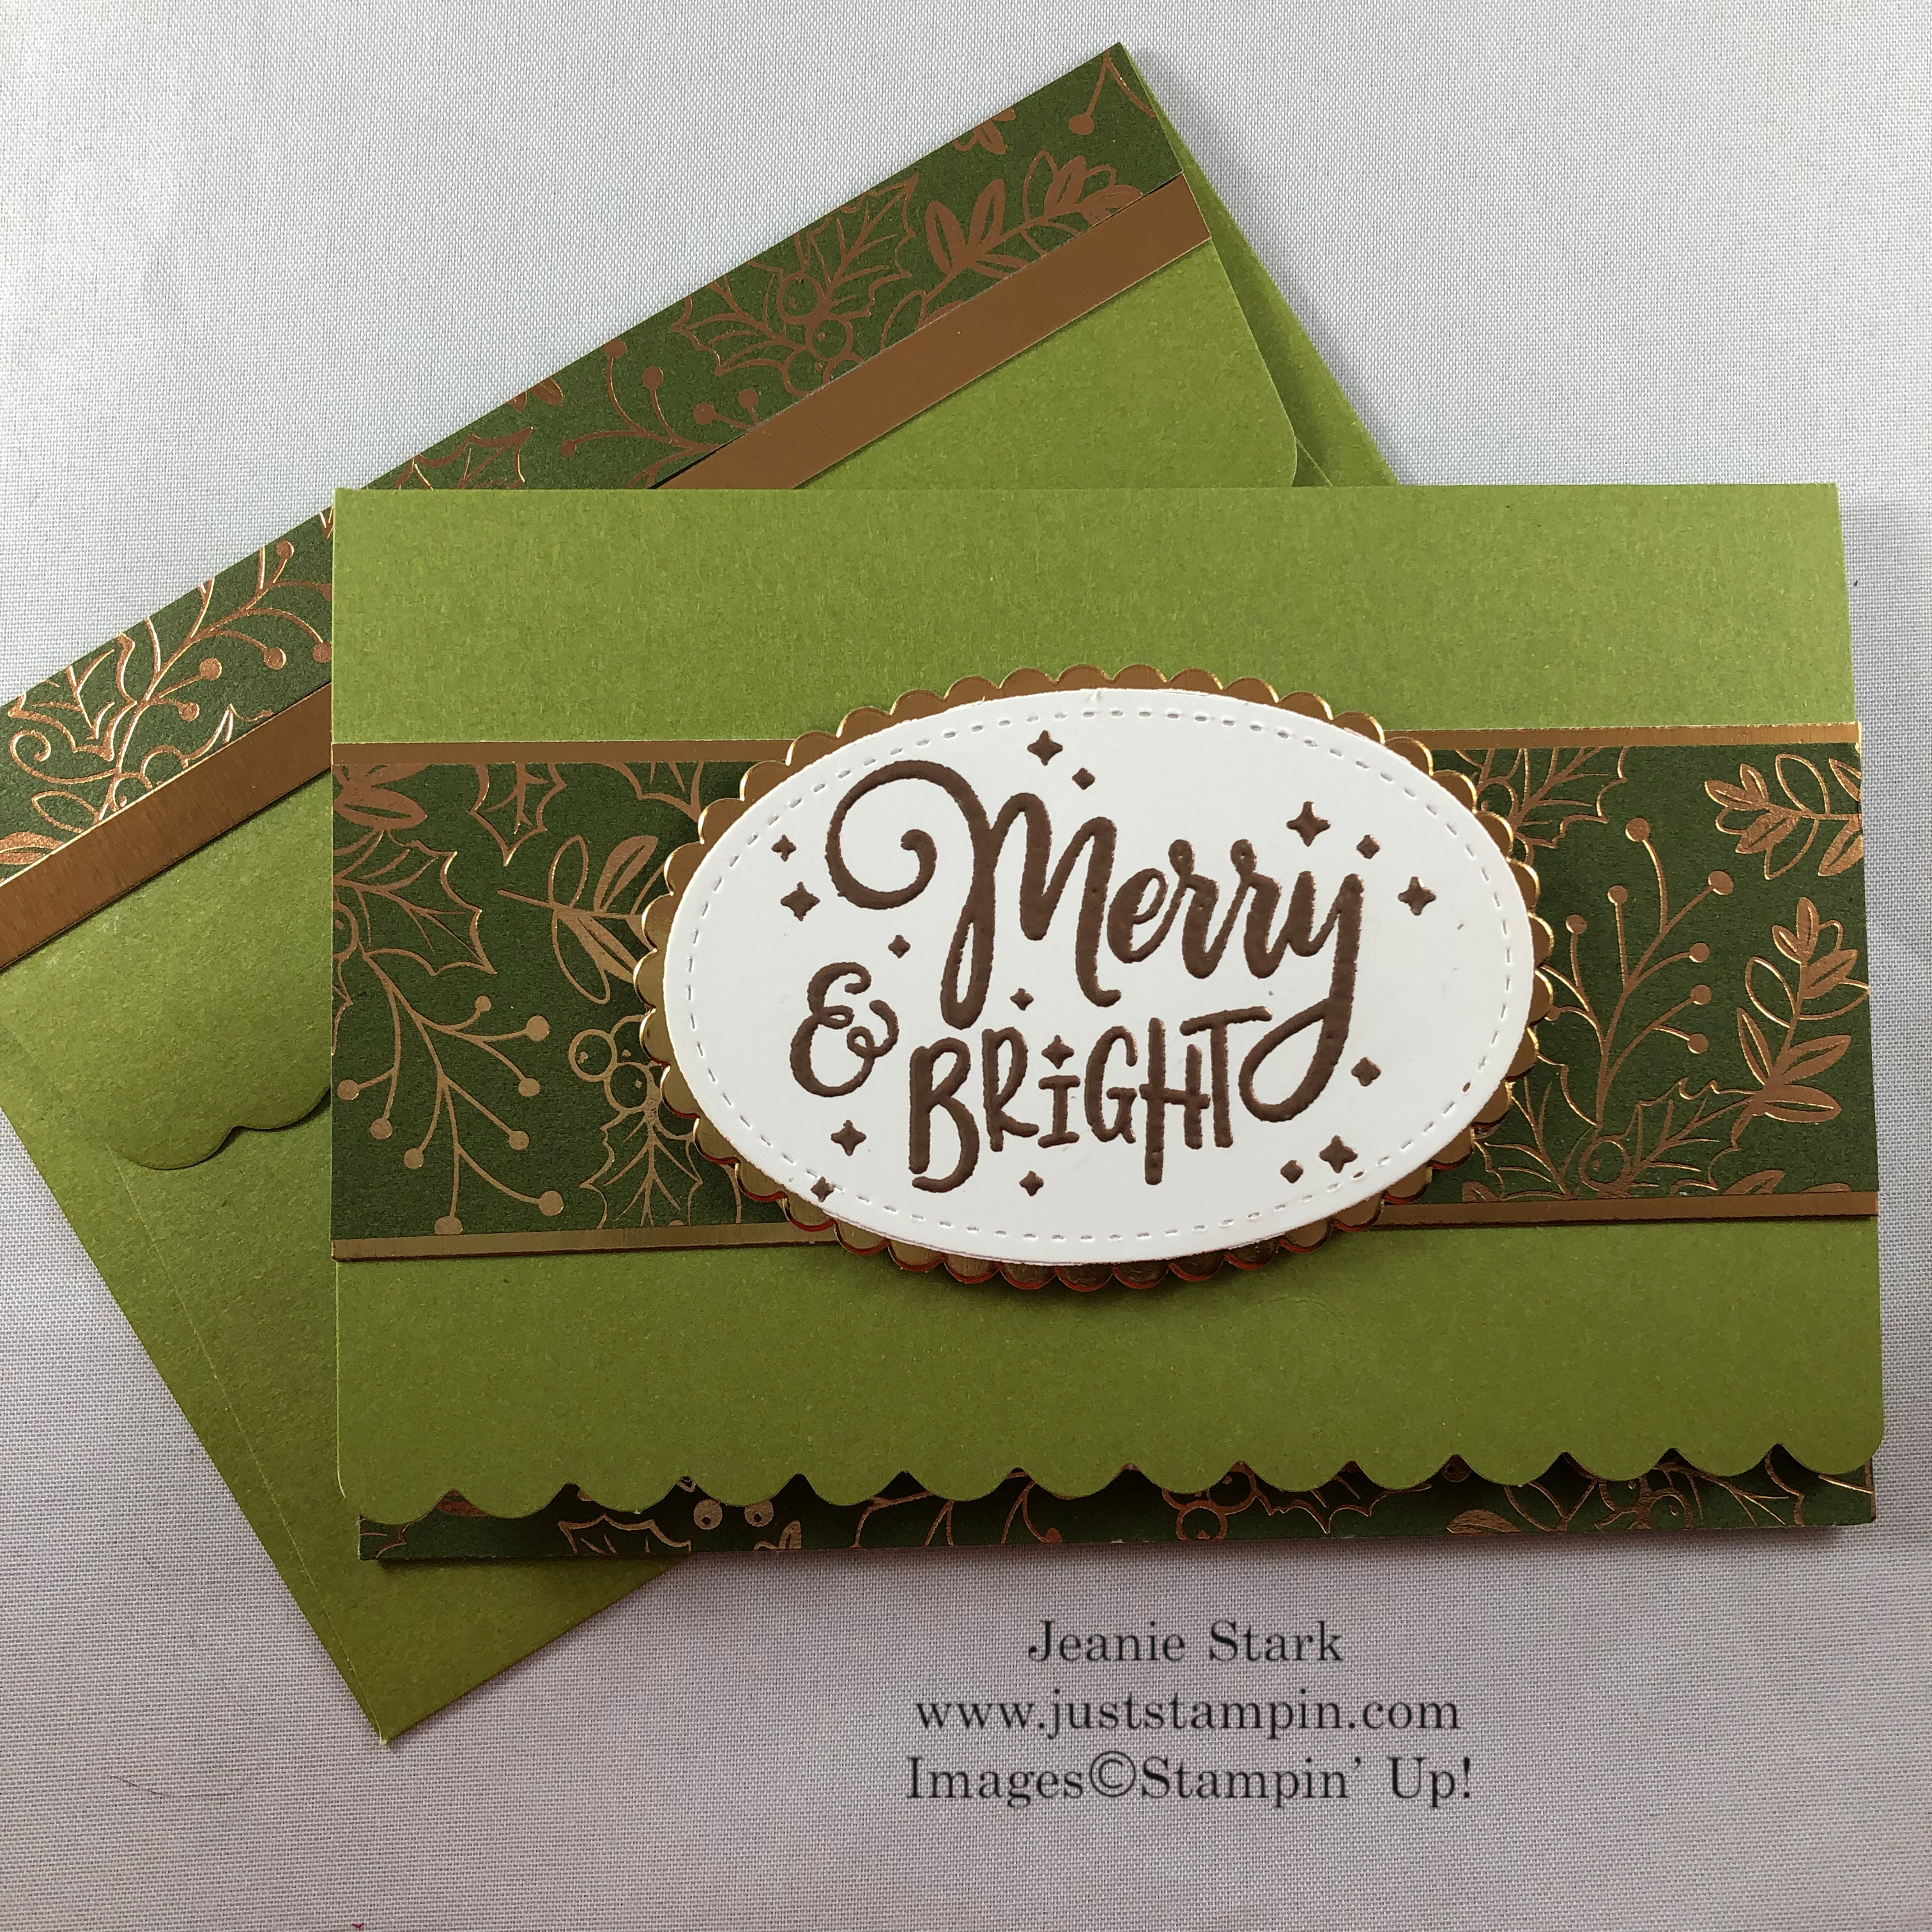 Stampin' Up! Everything Festive Holiday card idea using Scalloped Note Cards & envelopes and Brightly Gleaming Specialty Designer Series Paper - Jeanie Stark StampinUp